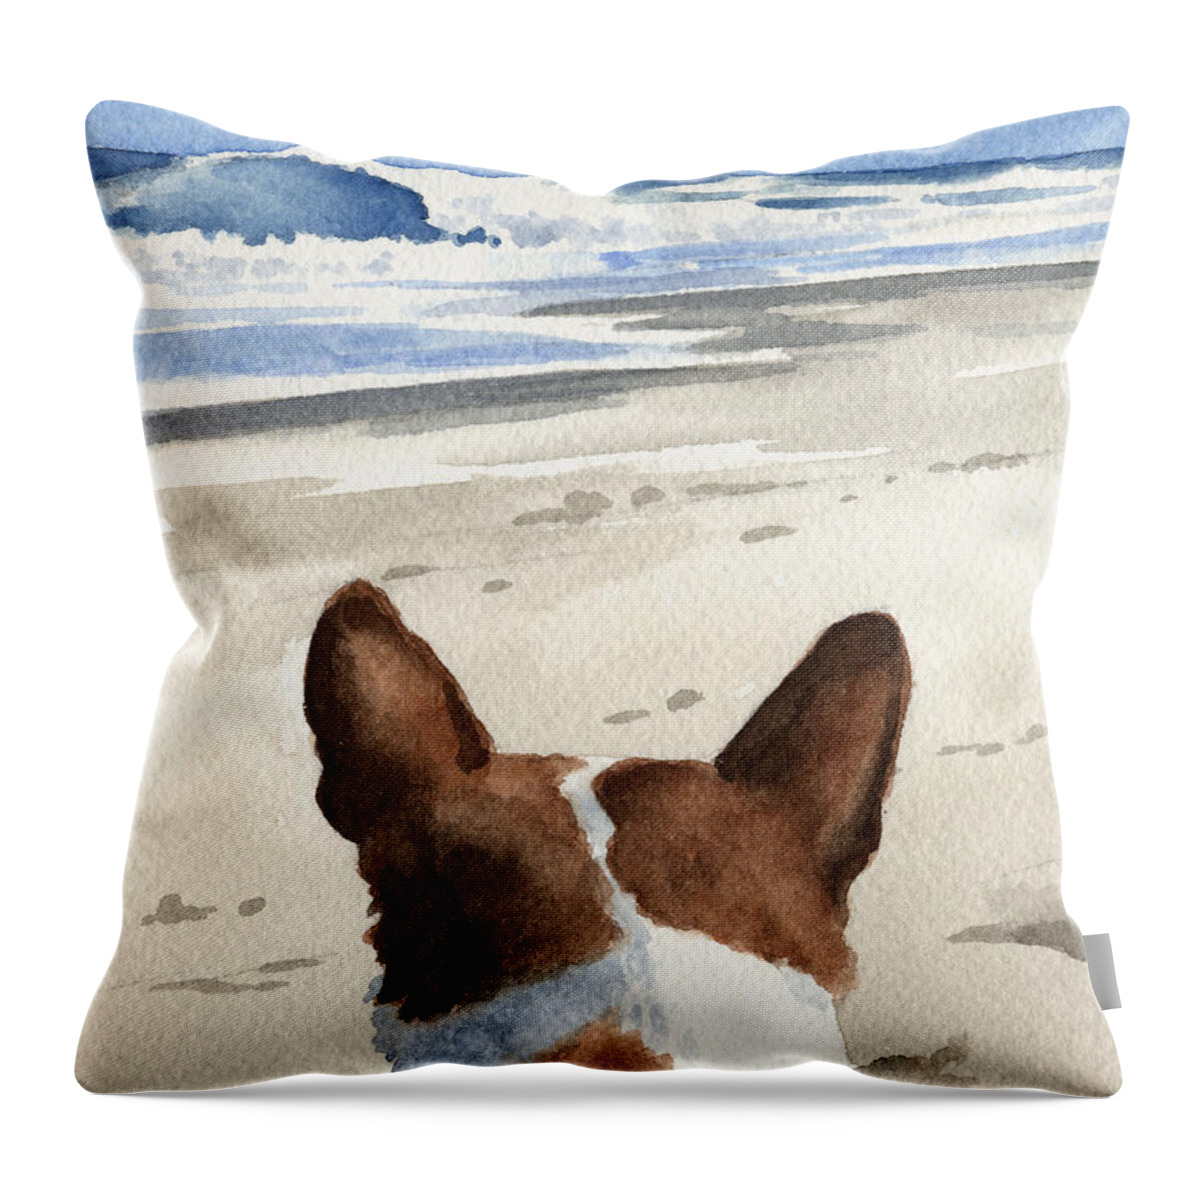 Basenji Throw Pillow featuring the painting Basenji At The Beach by David Rogers